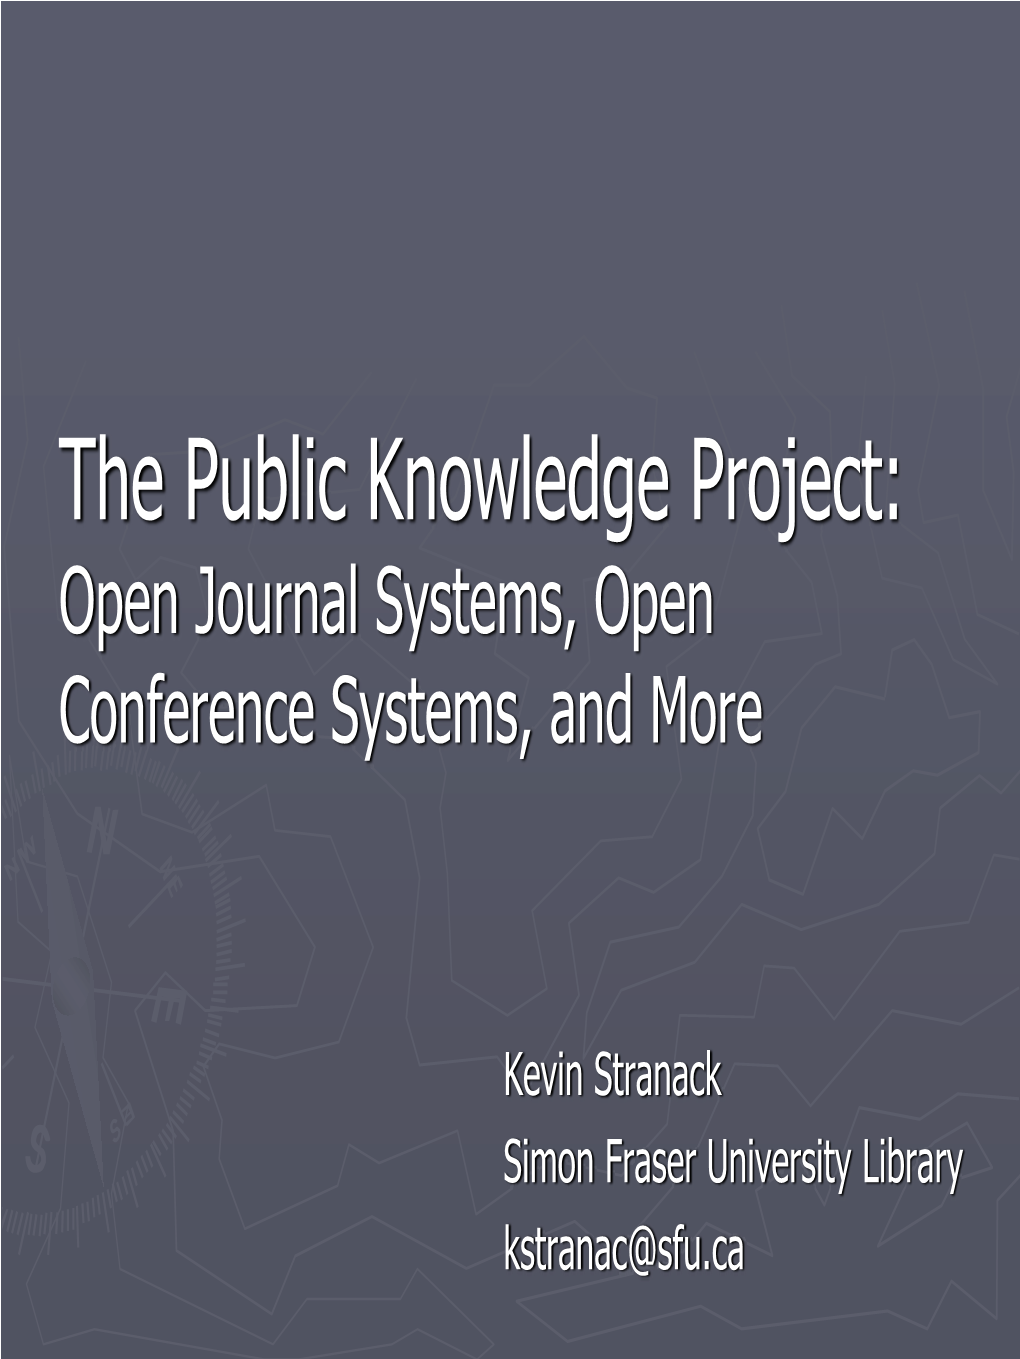 The Public Knowledge Project: Open Journal Systems, Open Conference Systems, and More